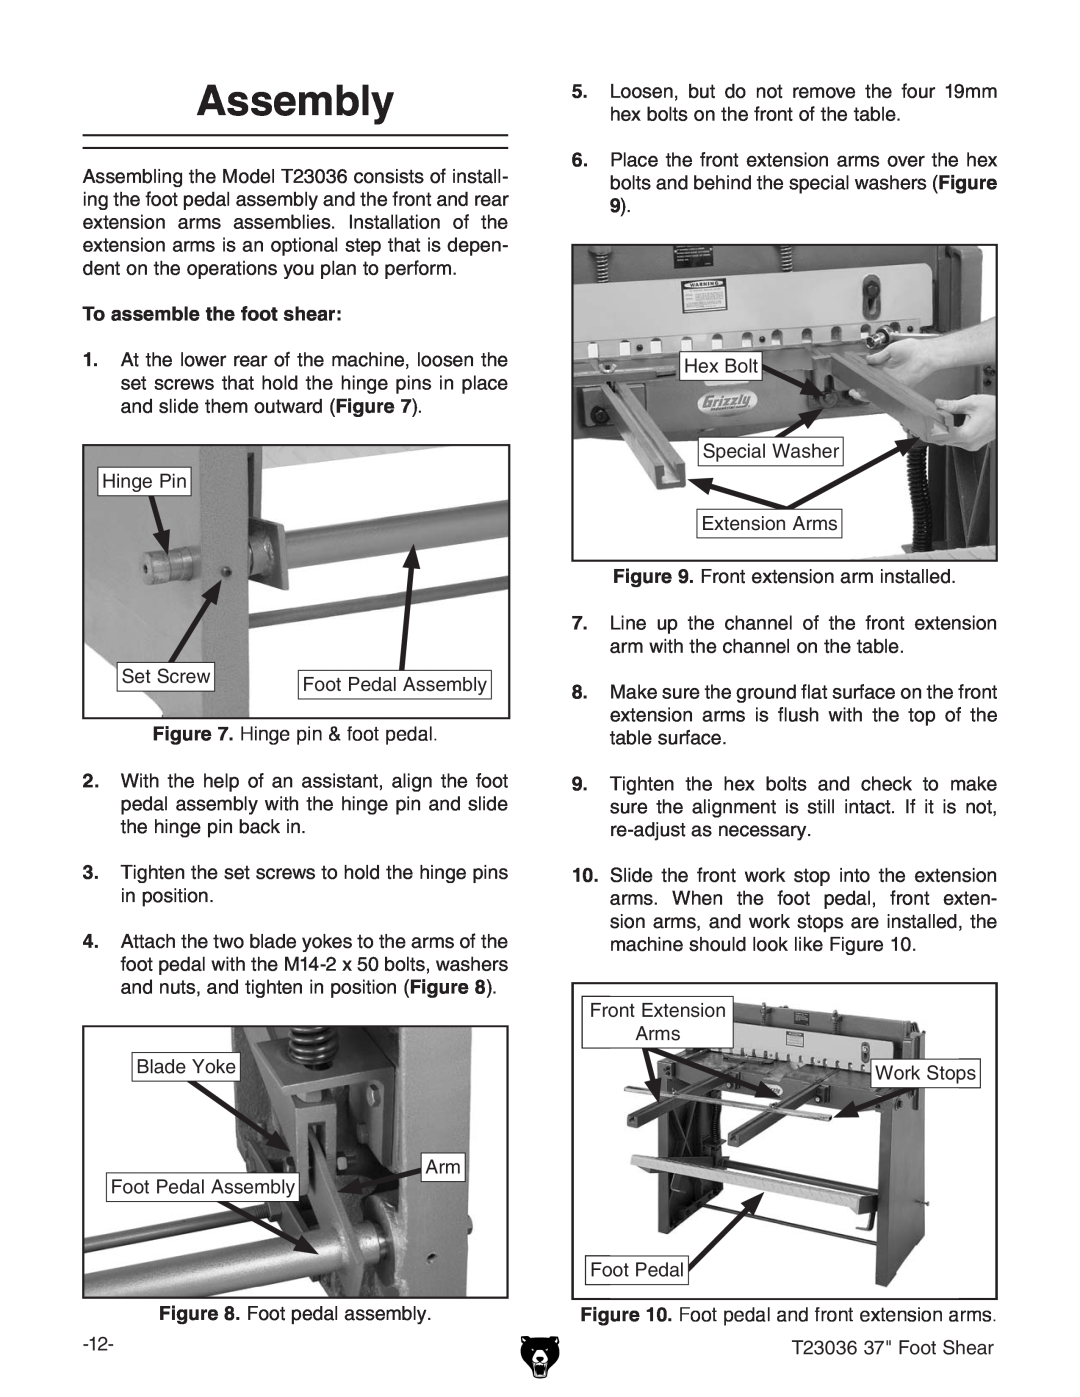 Grizzly T23036 owner manual Assembly, To assemble the foot shear 